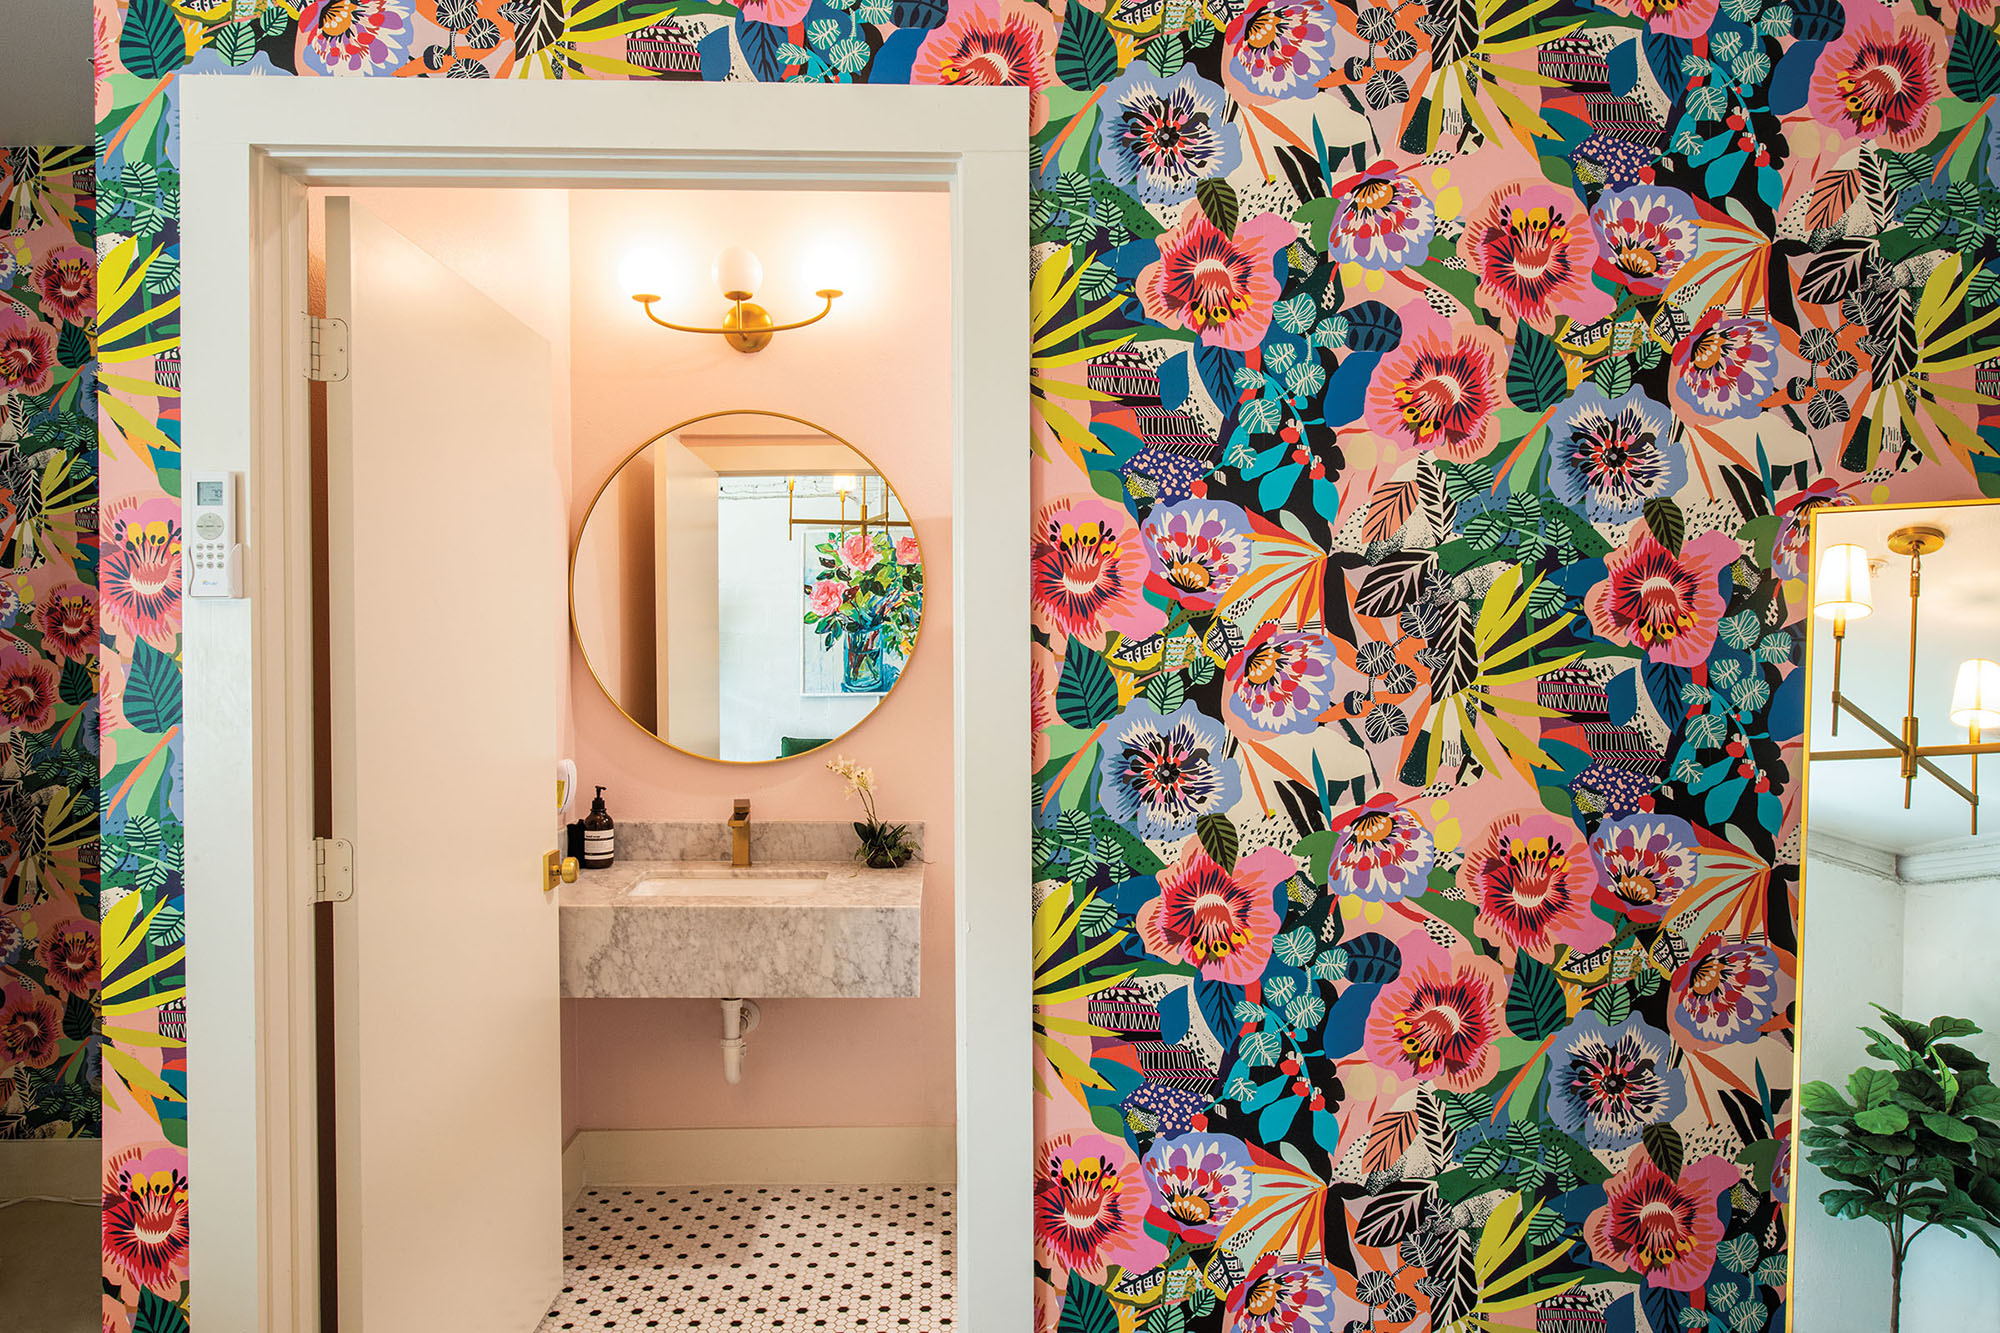 A brightly colored mural adorns a white-paneled doorway with a mirror visible